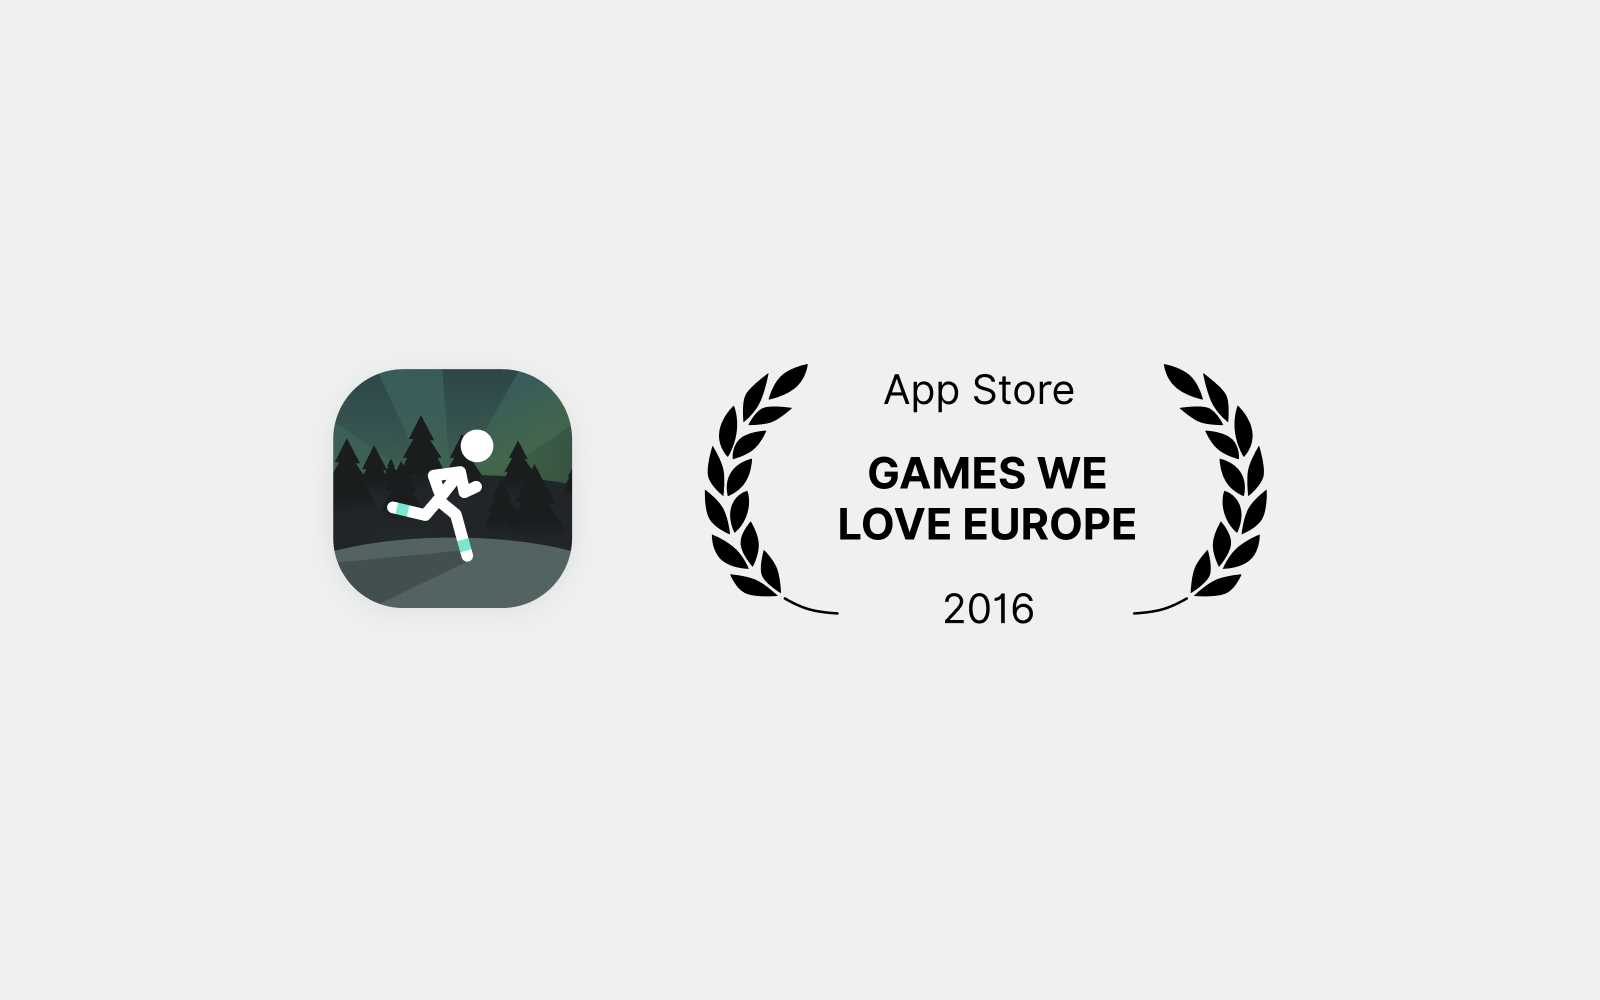 Particular was featured by Apple as 'Games we love' in all Europe, in 2016.